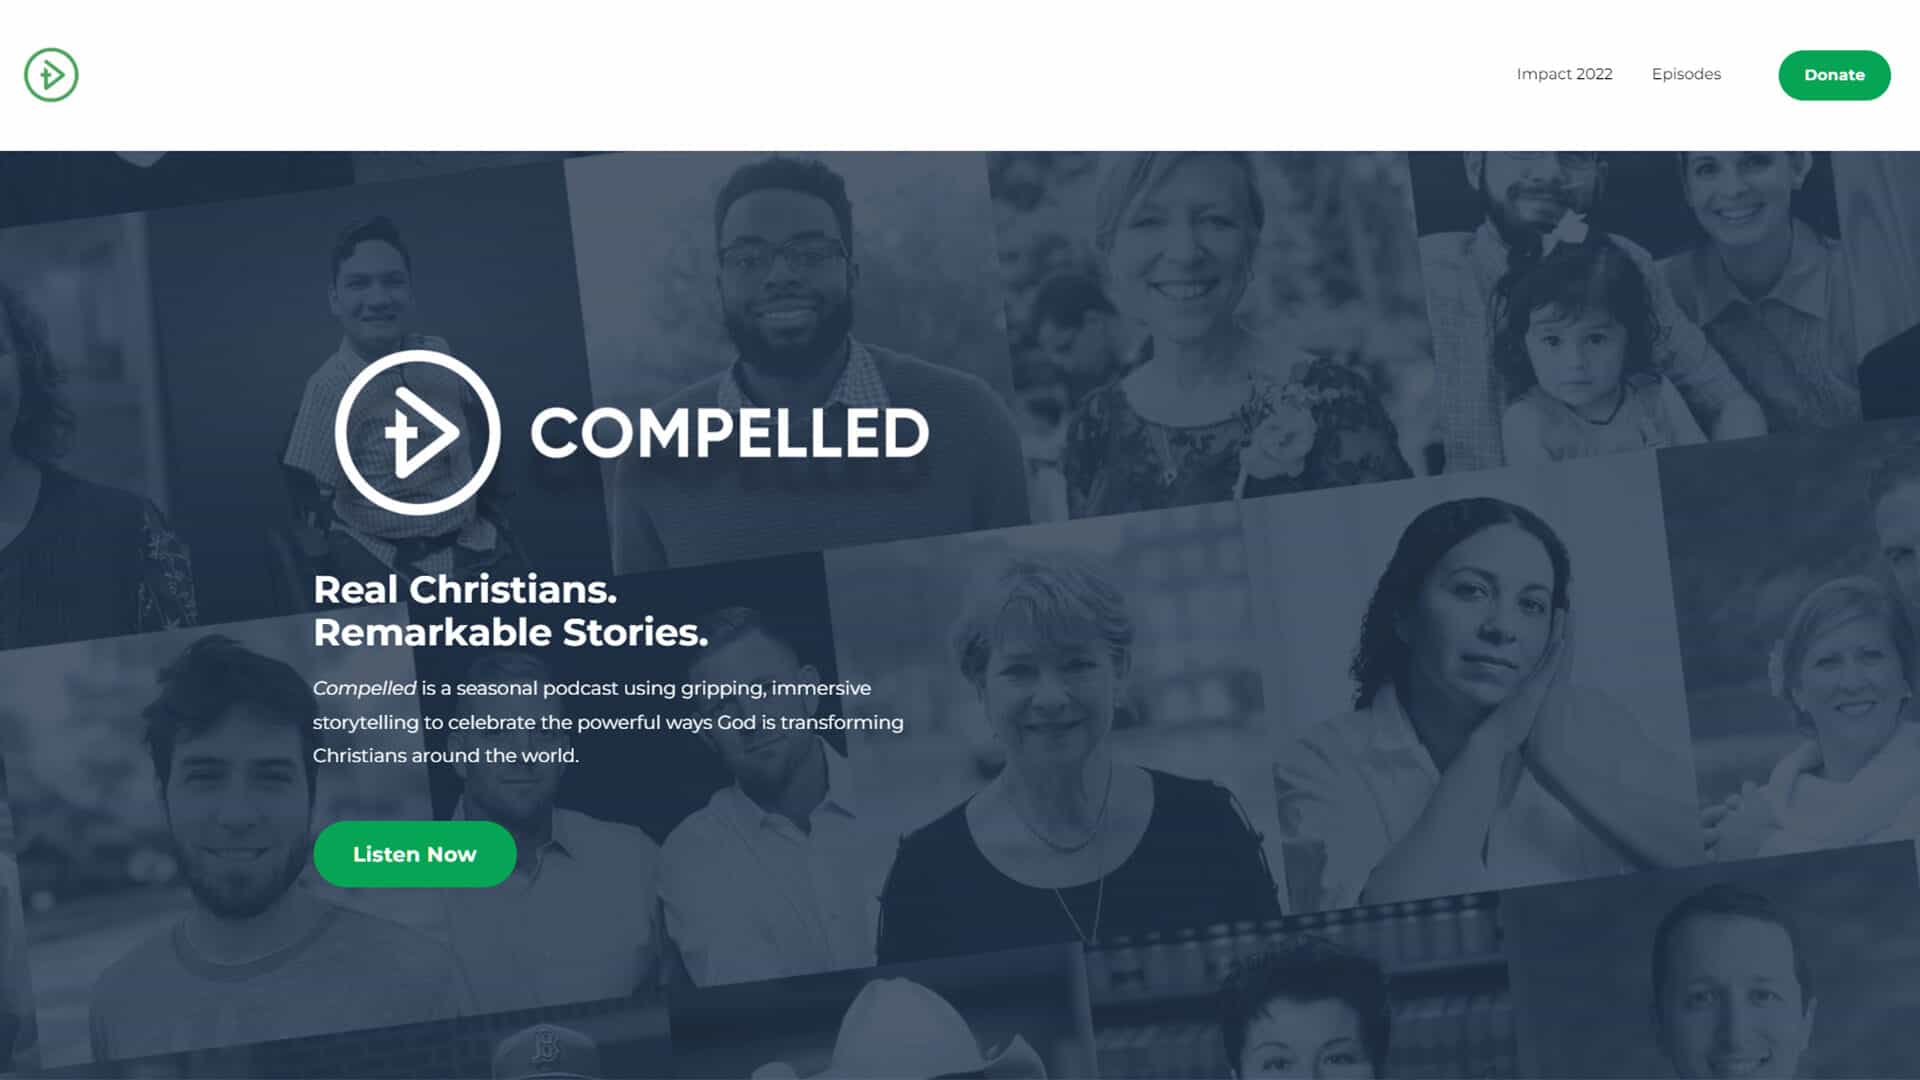 Compelled Podcast homepage screenshot